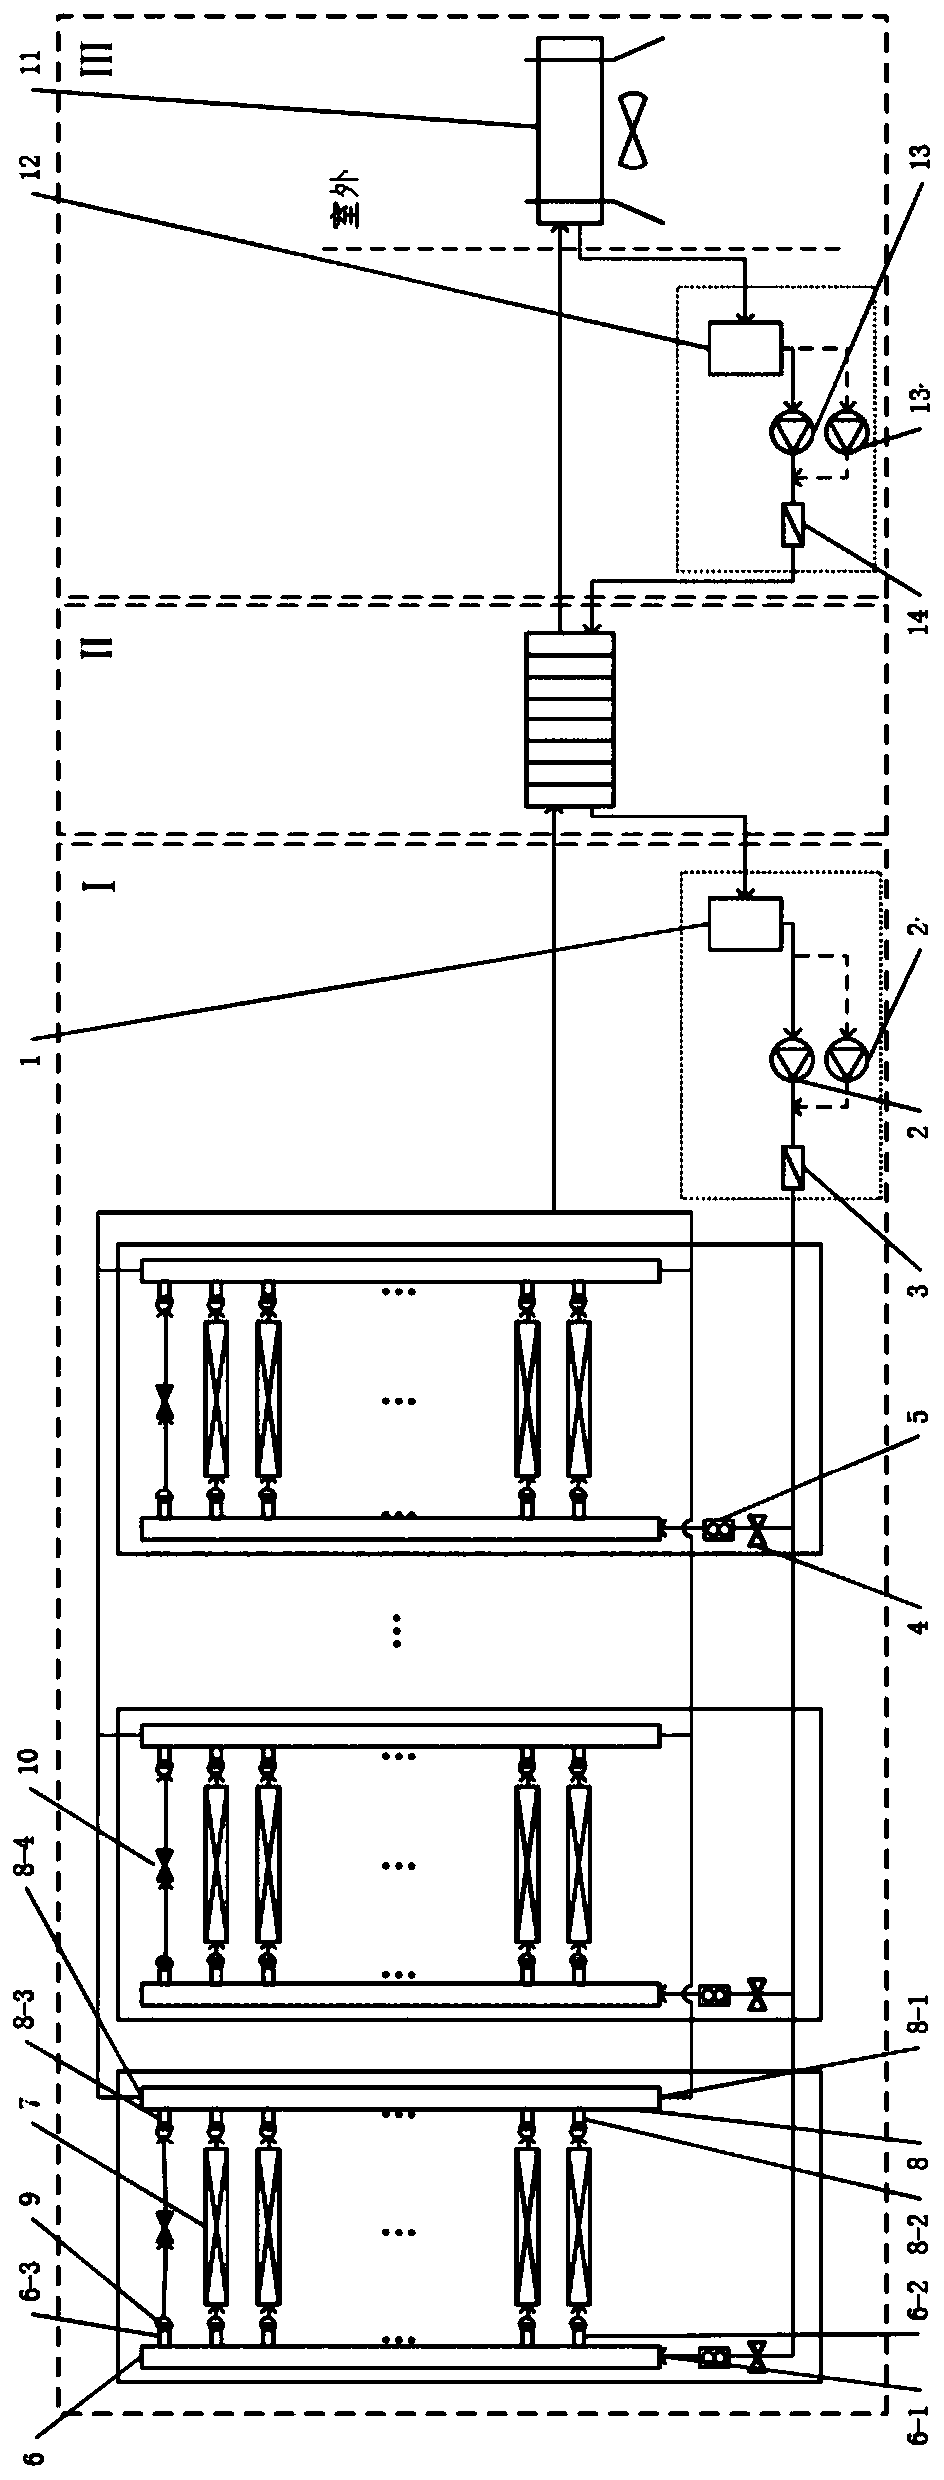 A multi-cabinet two-phase cooling system